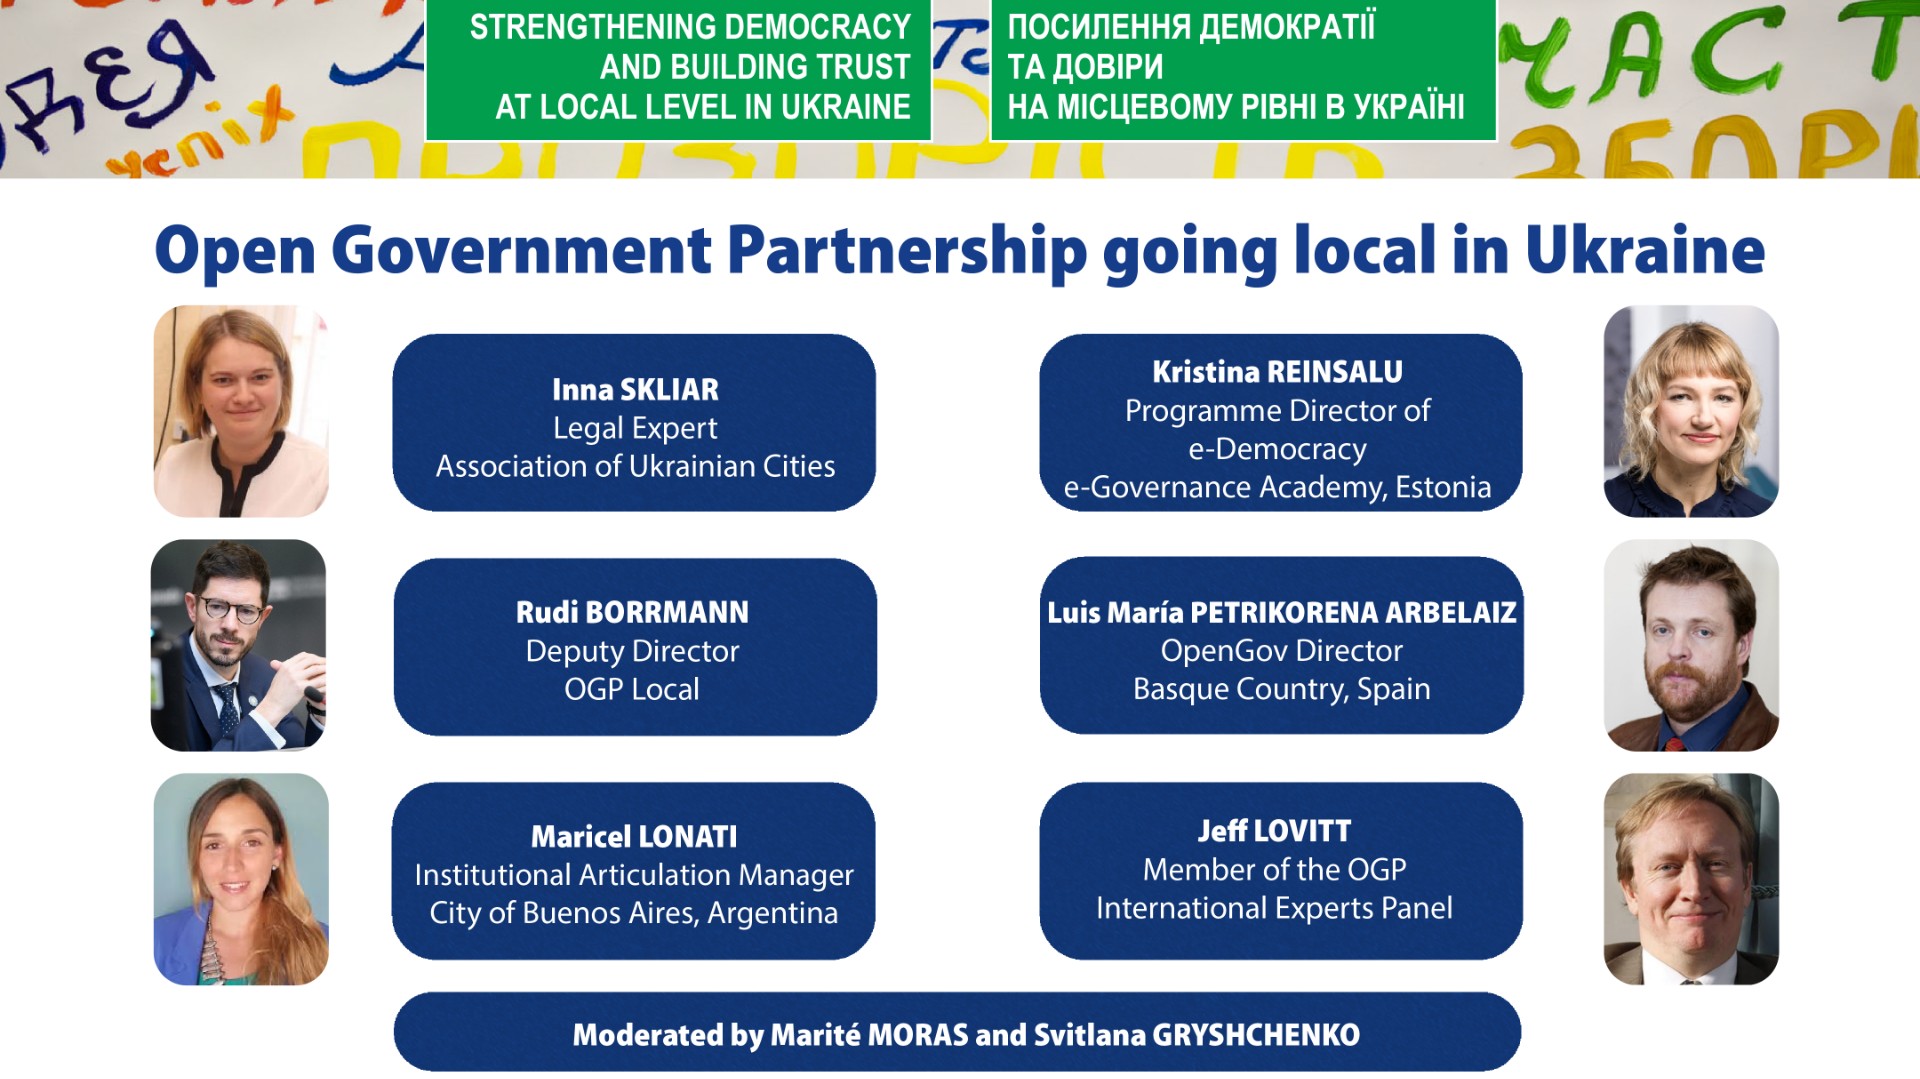 Ukrainian local authorities step up for open local government